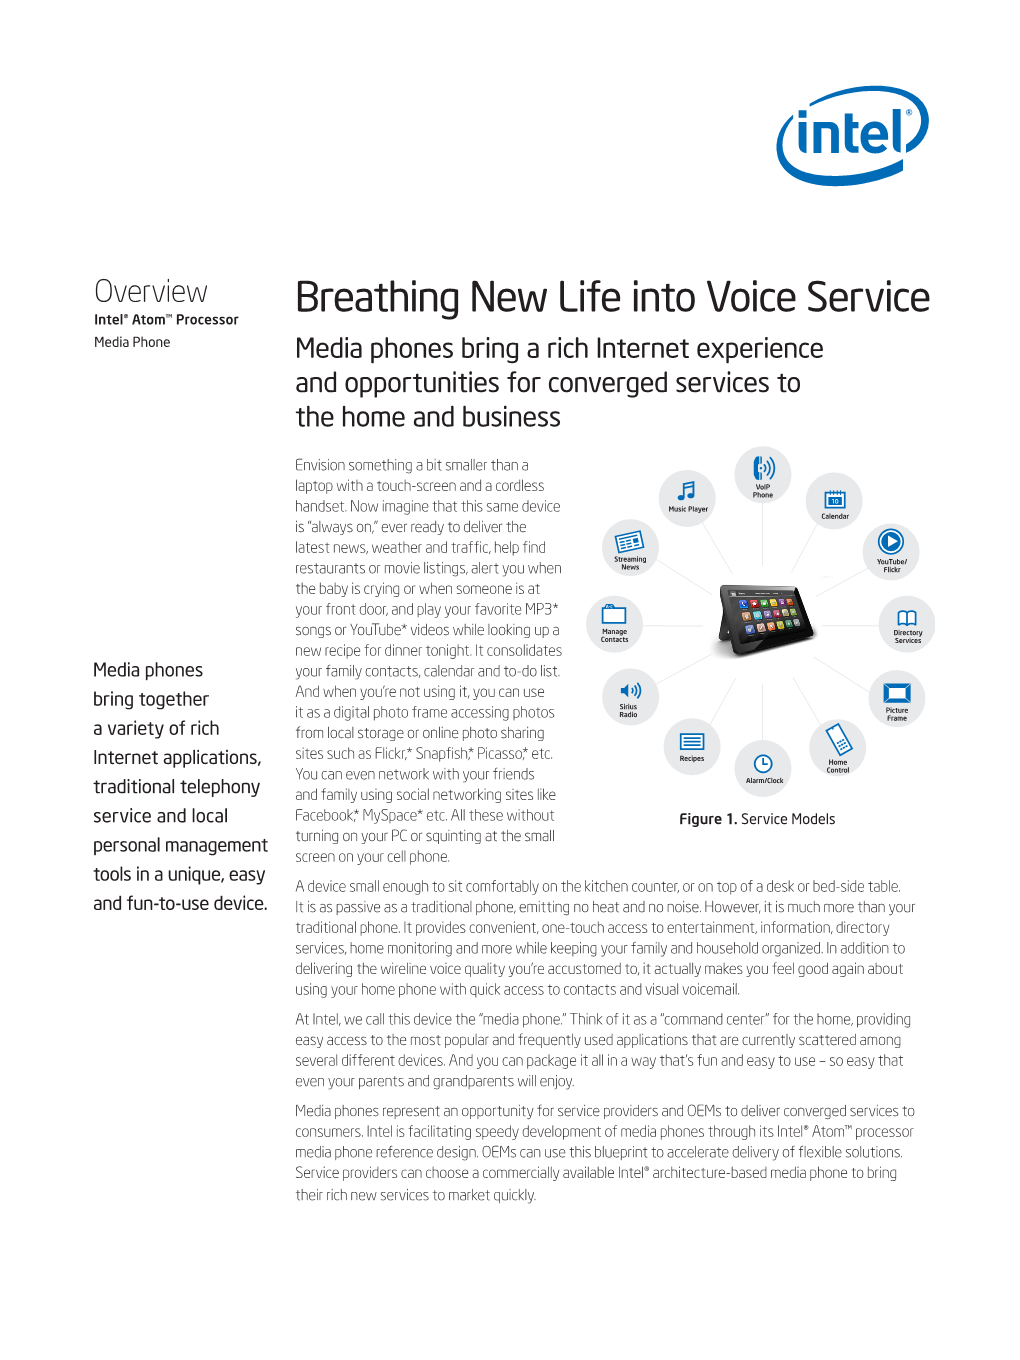 Media Phones Bring a Rich Internet Experience and Opportunities for Converged Services to the Home and Business